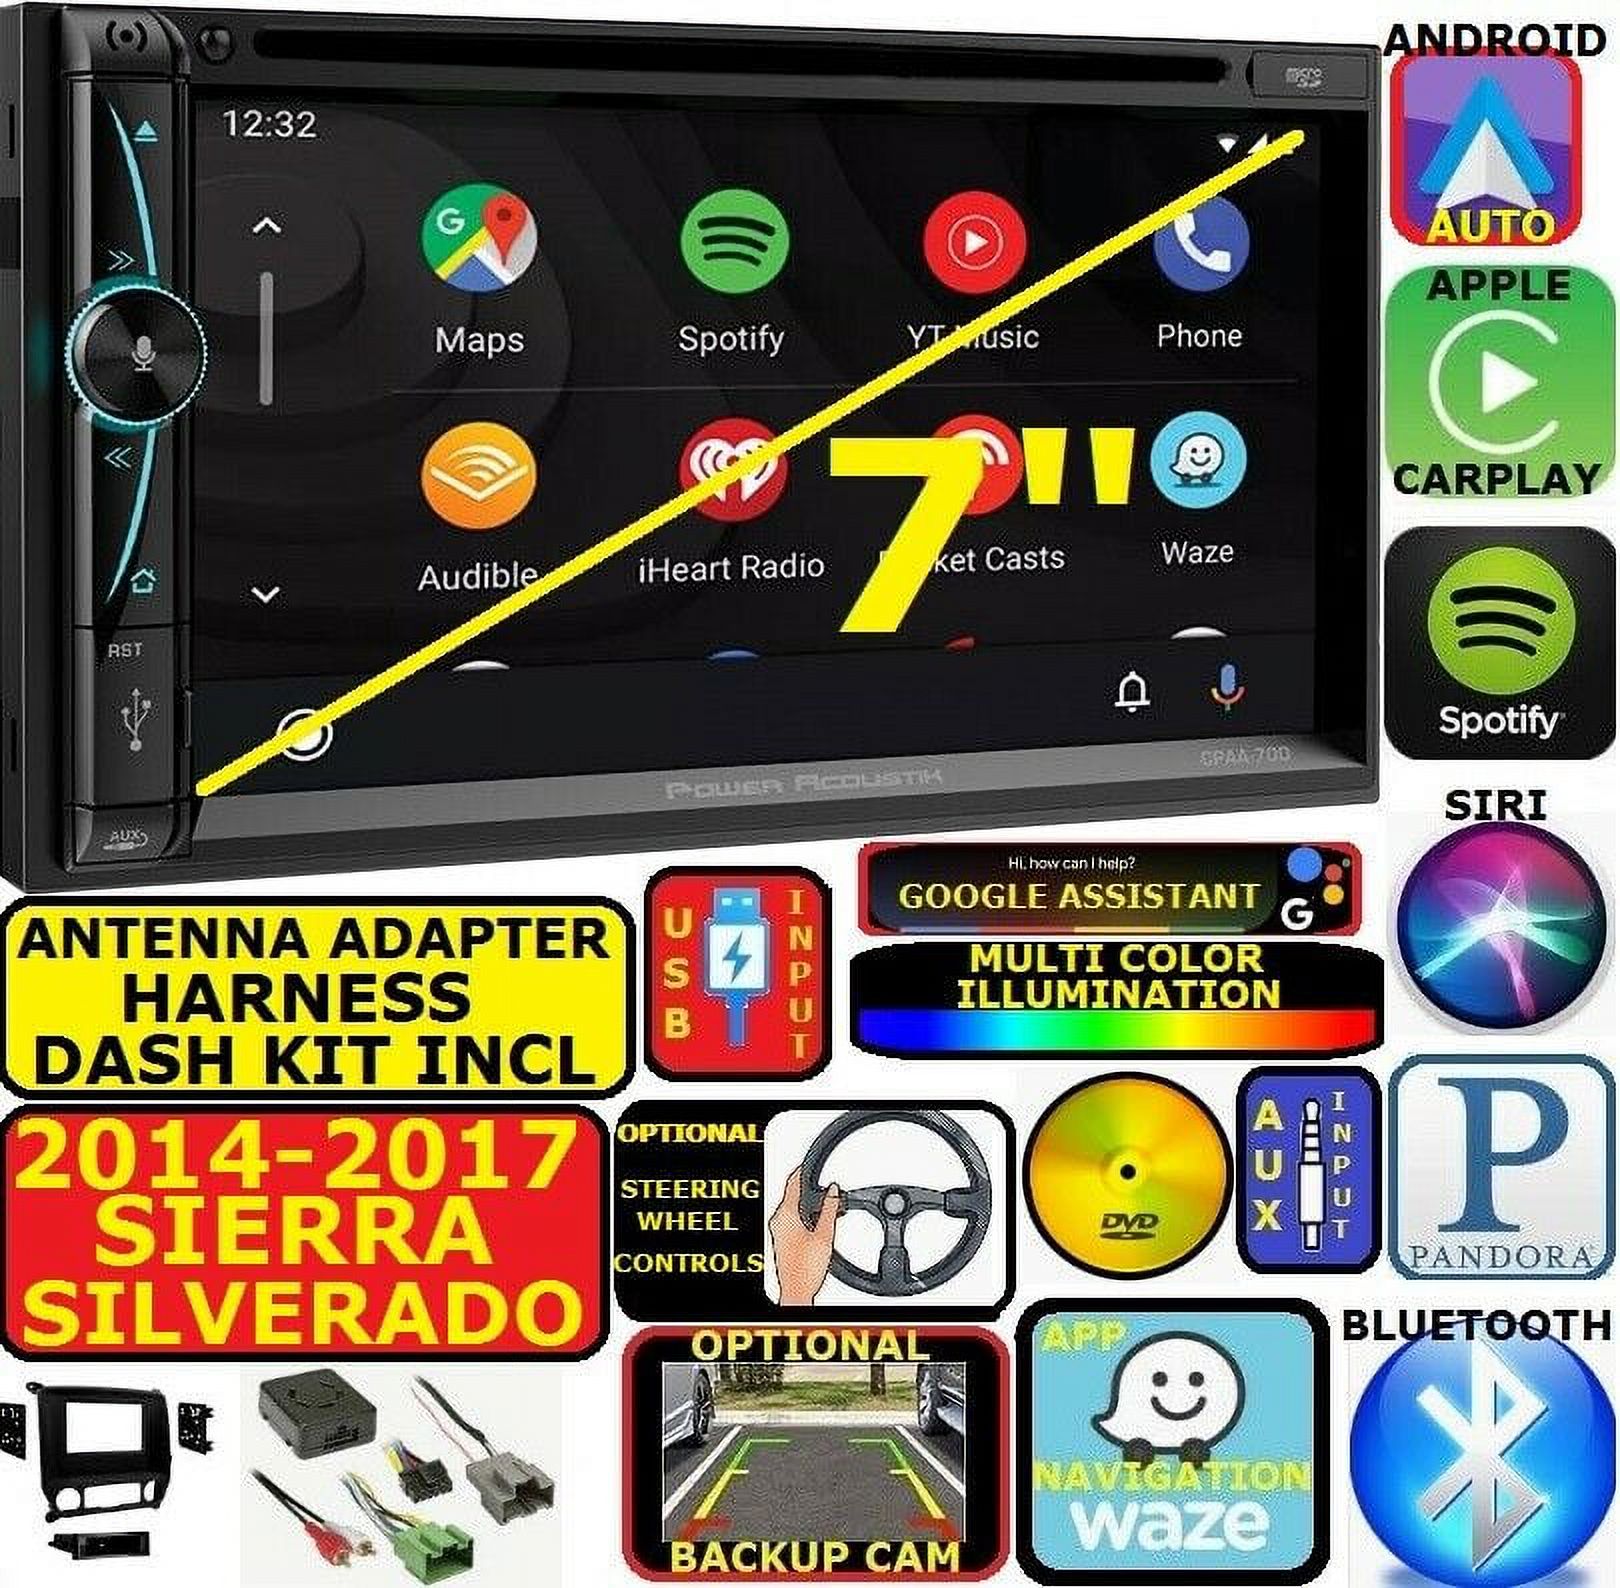 GMC SIERRA SAVANA GPS APPLE CARPLAY NAVIGATION (works with IPHONE) AM/FM USB/BLUETOOTH CAR RADIO STEREO PKG. INCL. VEHICLE HARDWARE: DASH KIT, WIRE HARNESS, AND ANTENNA ADAPTER WHEN REQIRED. - image 1 of 7